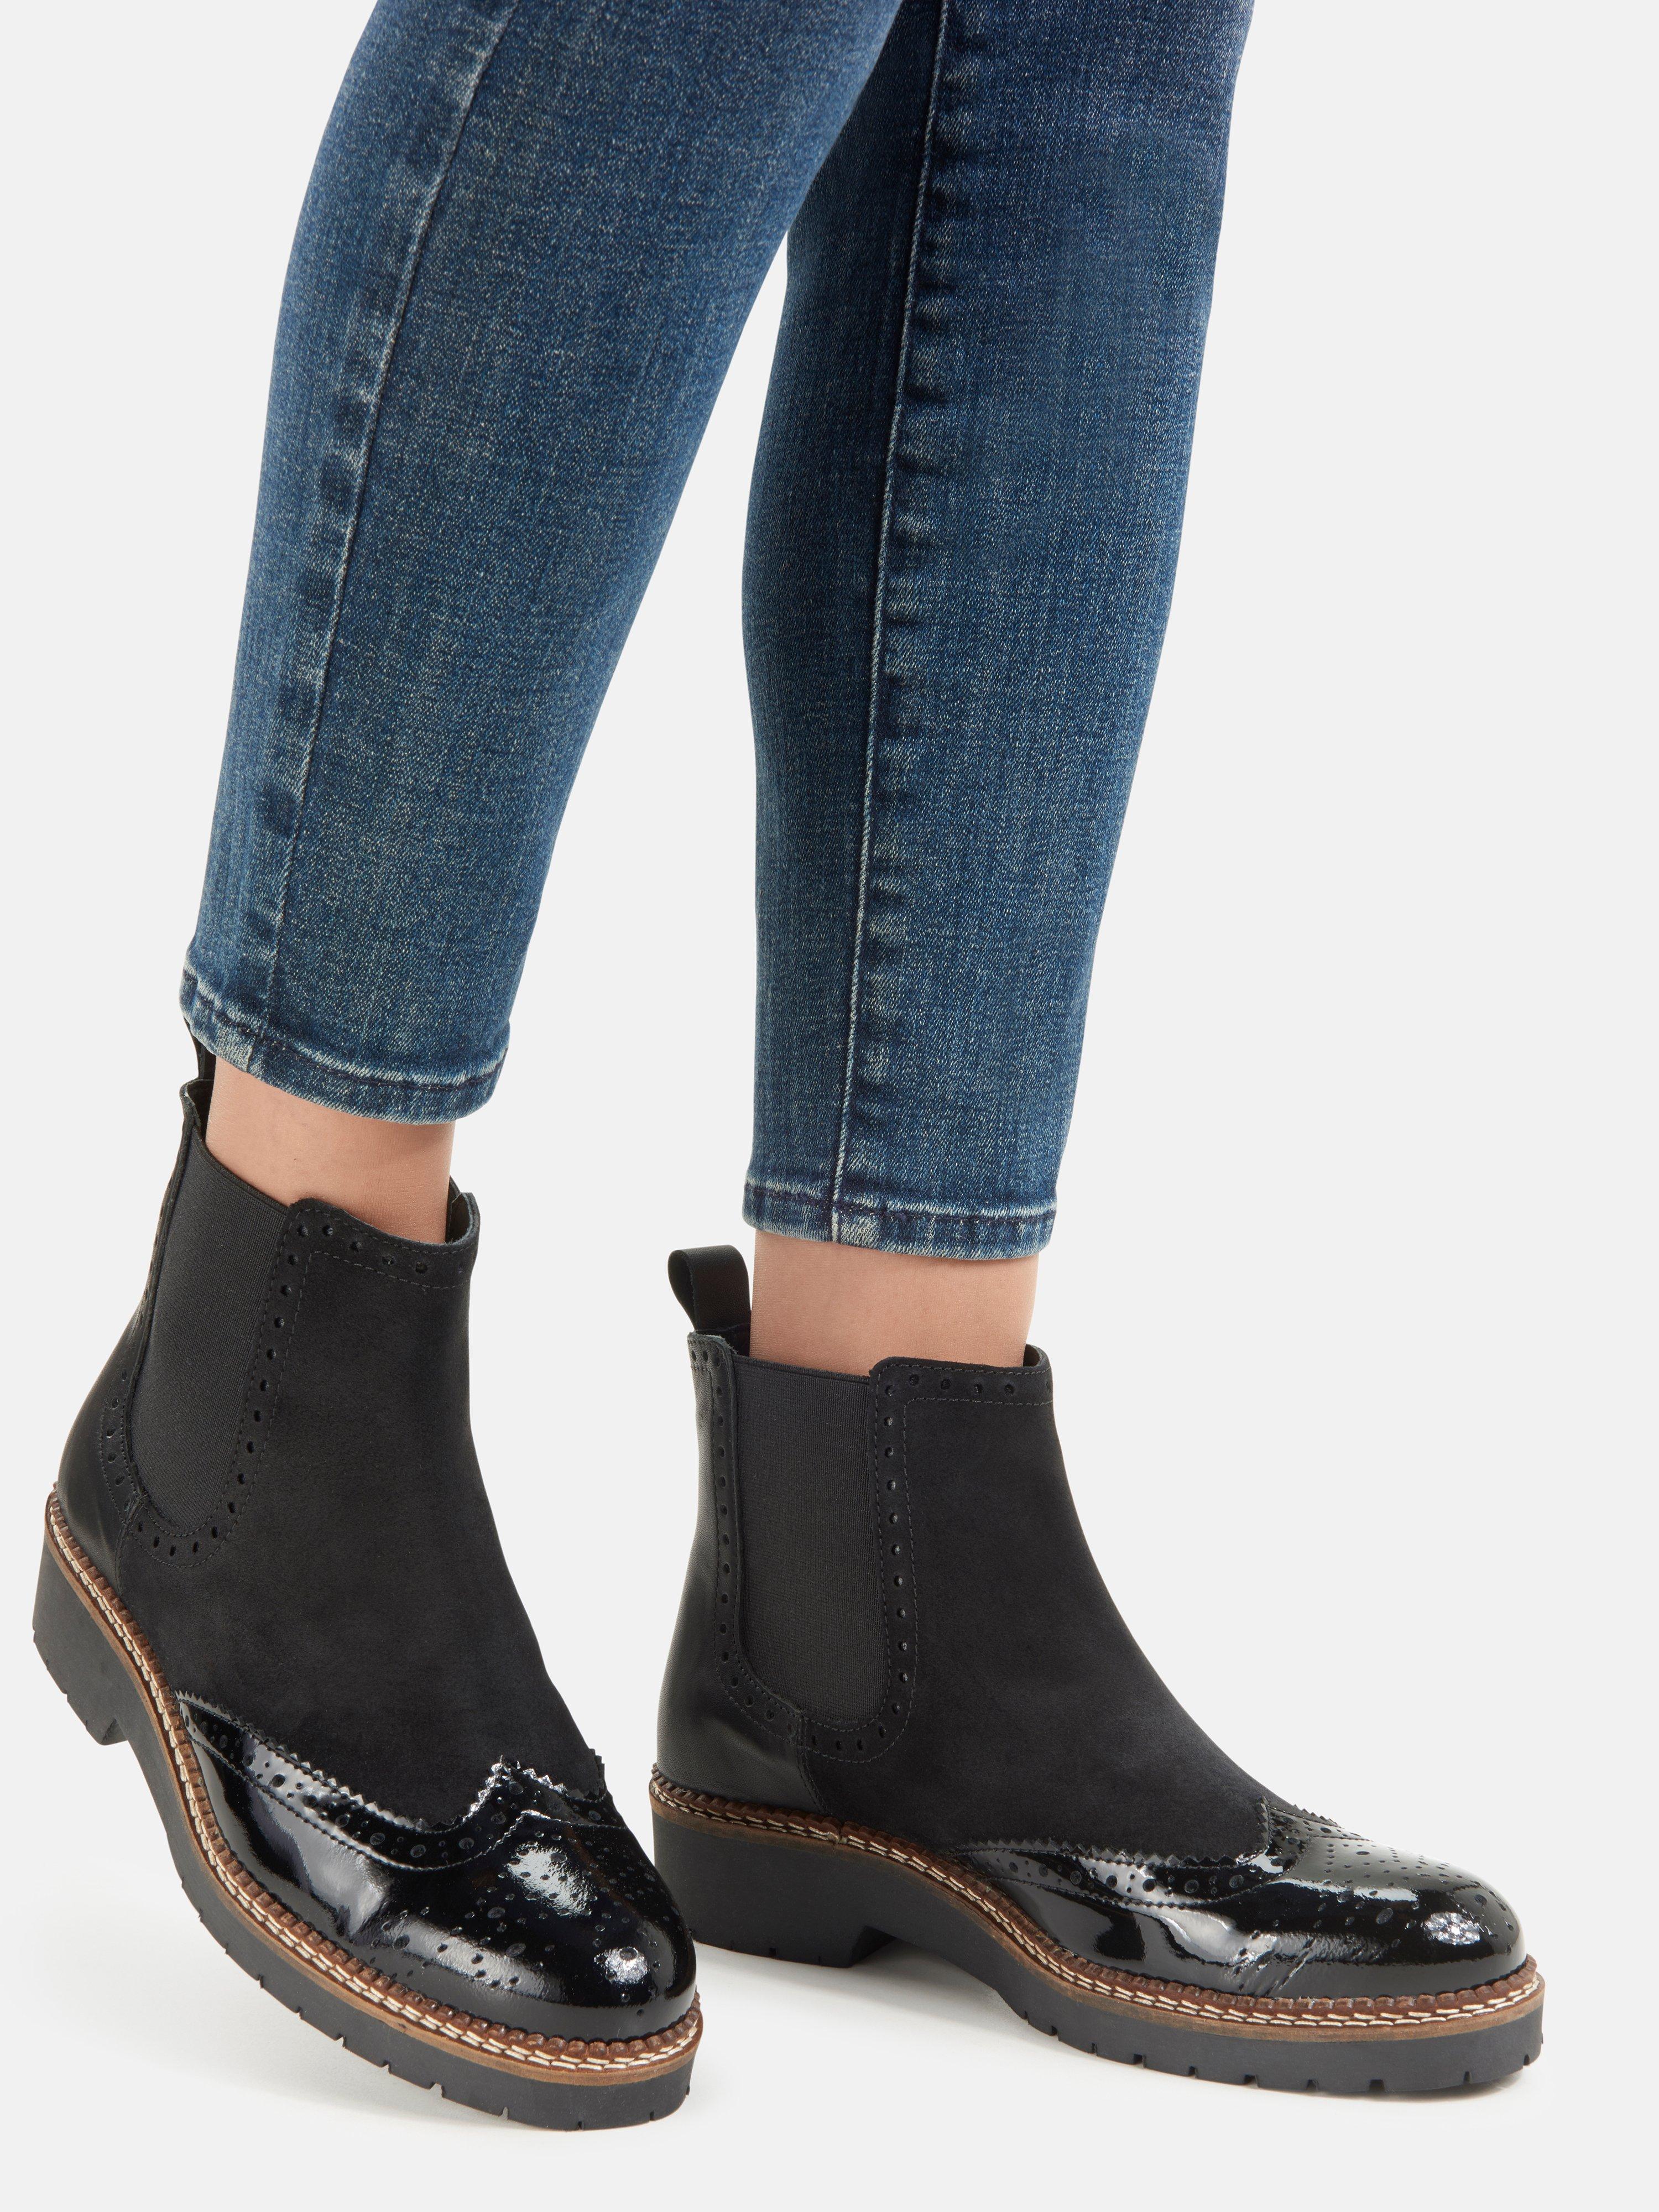 Peter Hahn - Ankle boots made of cowhide suede leather - black